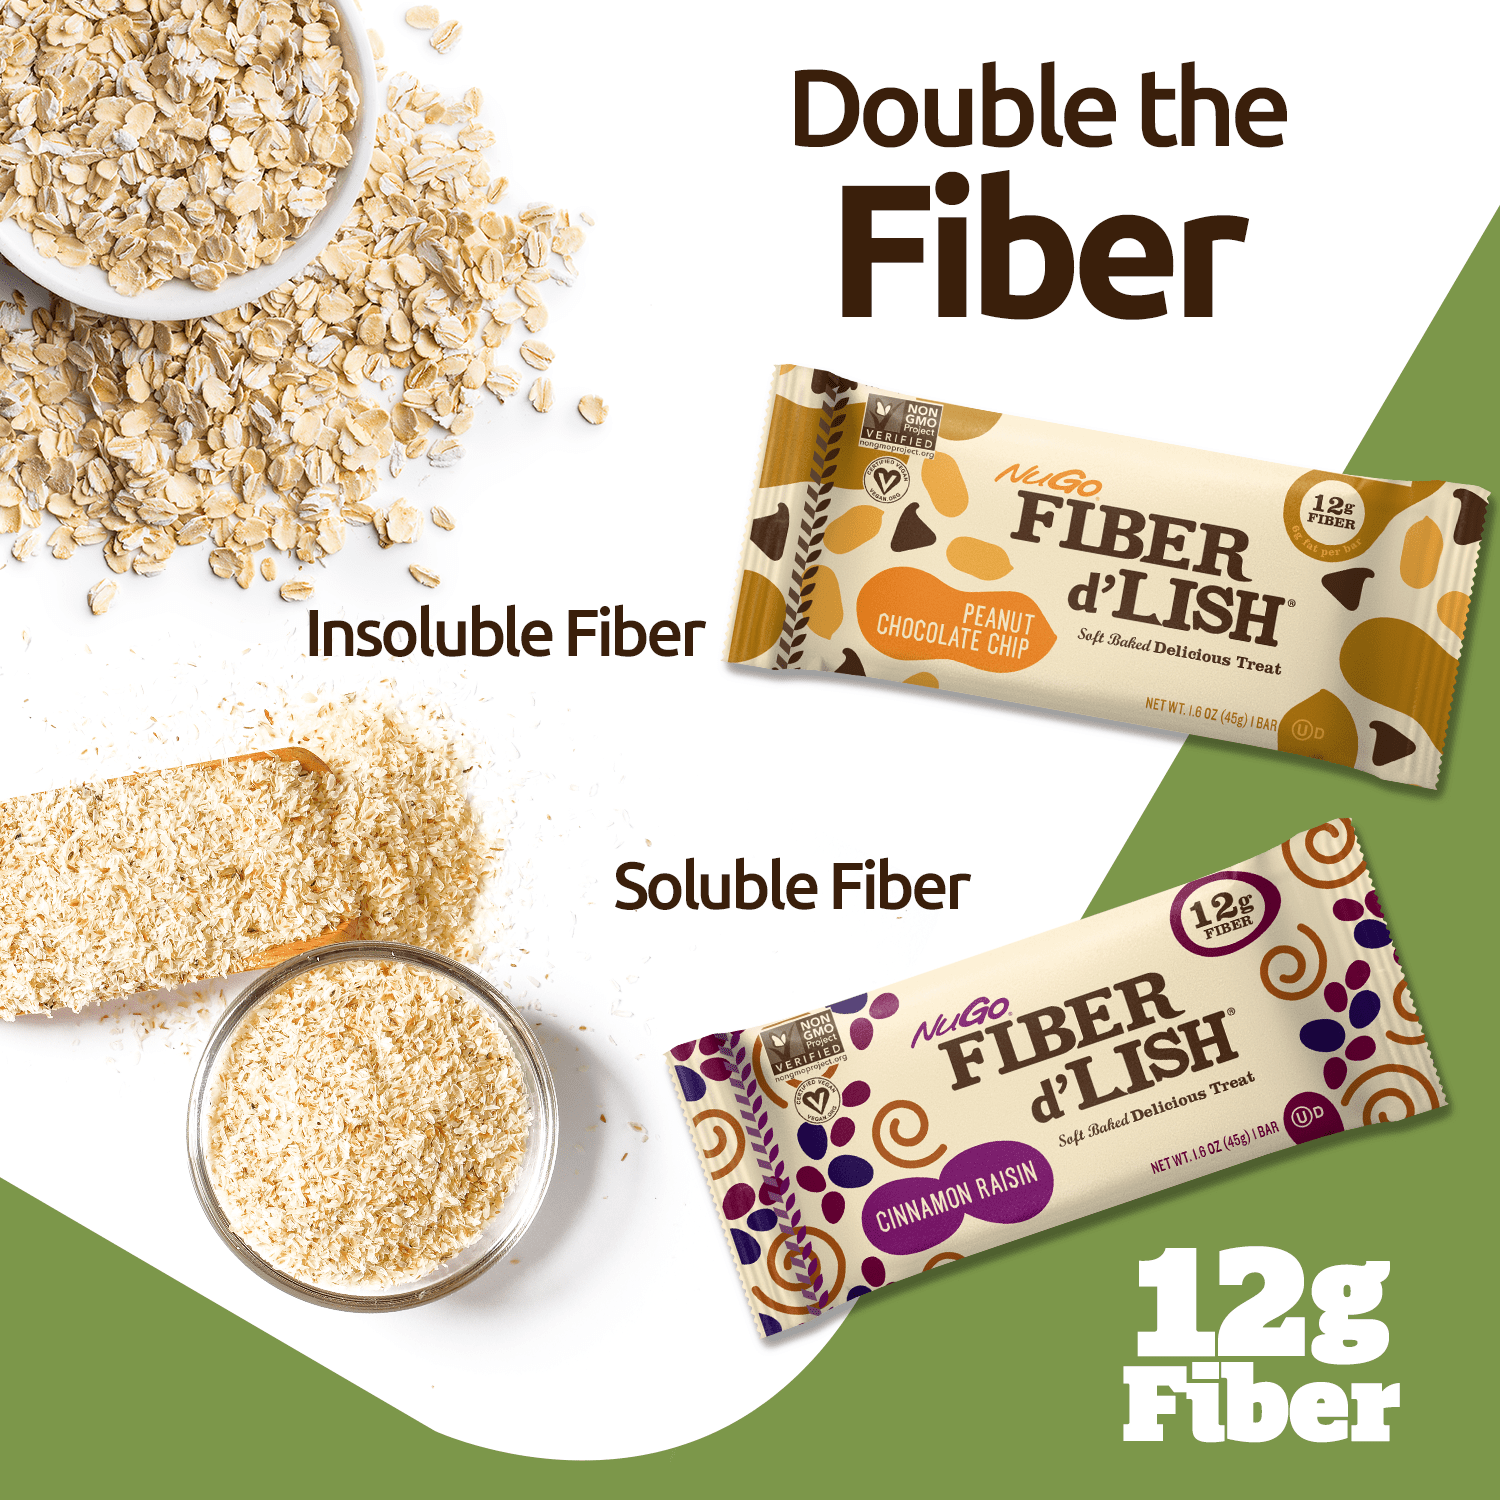 Double the Fiber - Soluble and Insoluble Fiber Text Image